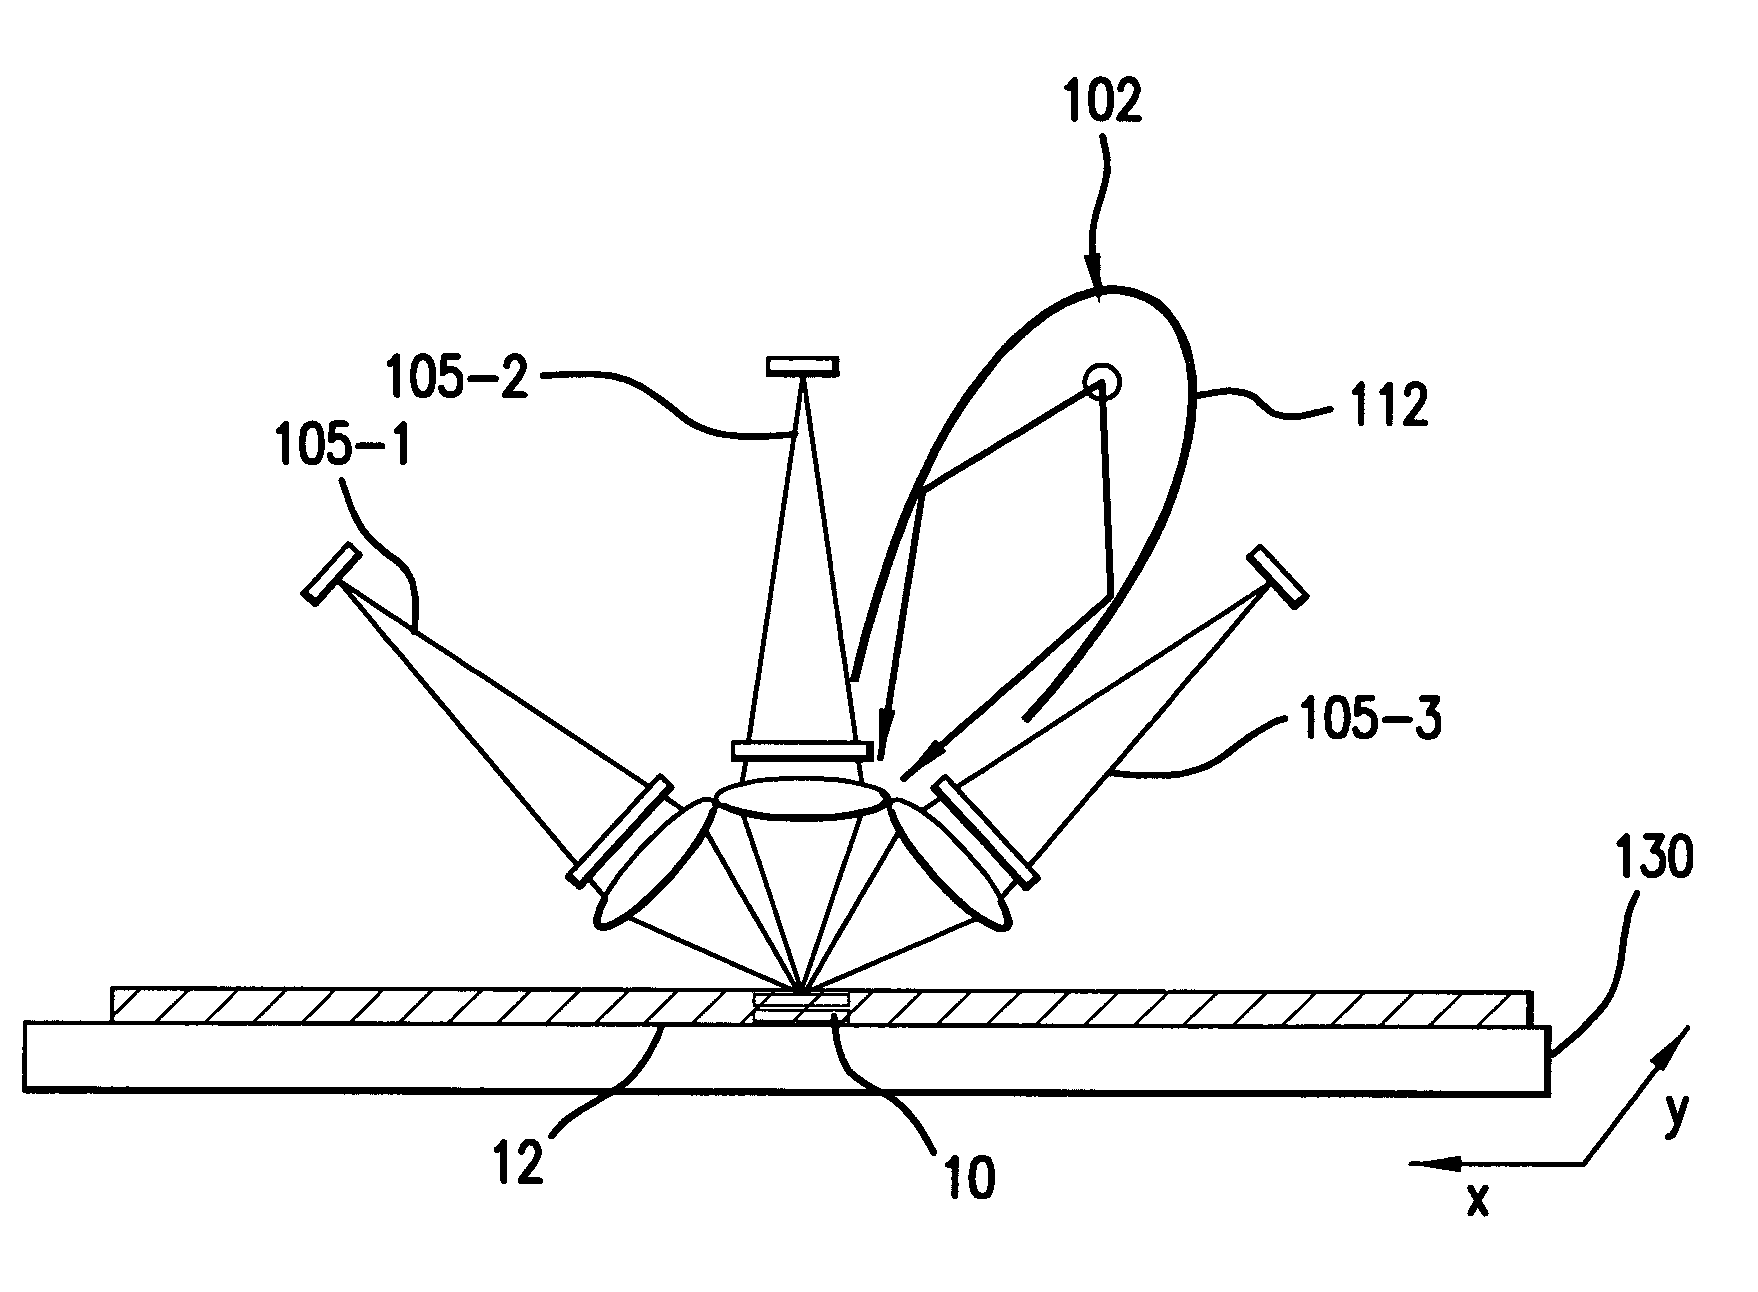 Element-specific X-ray fluorescence microscope and method of operation